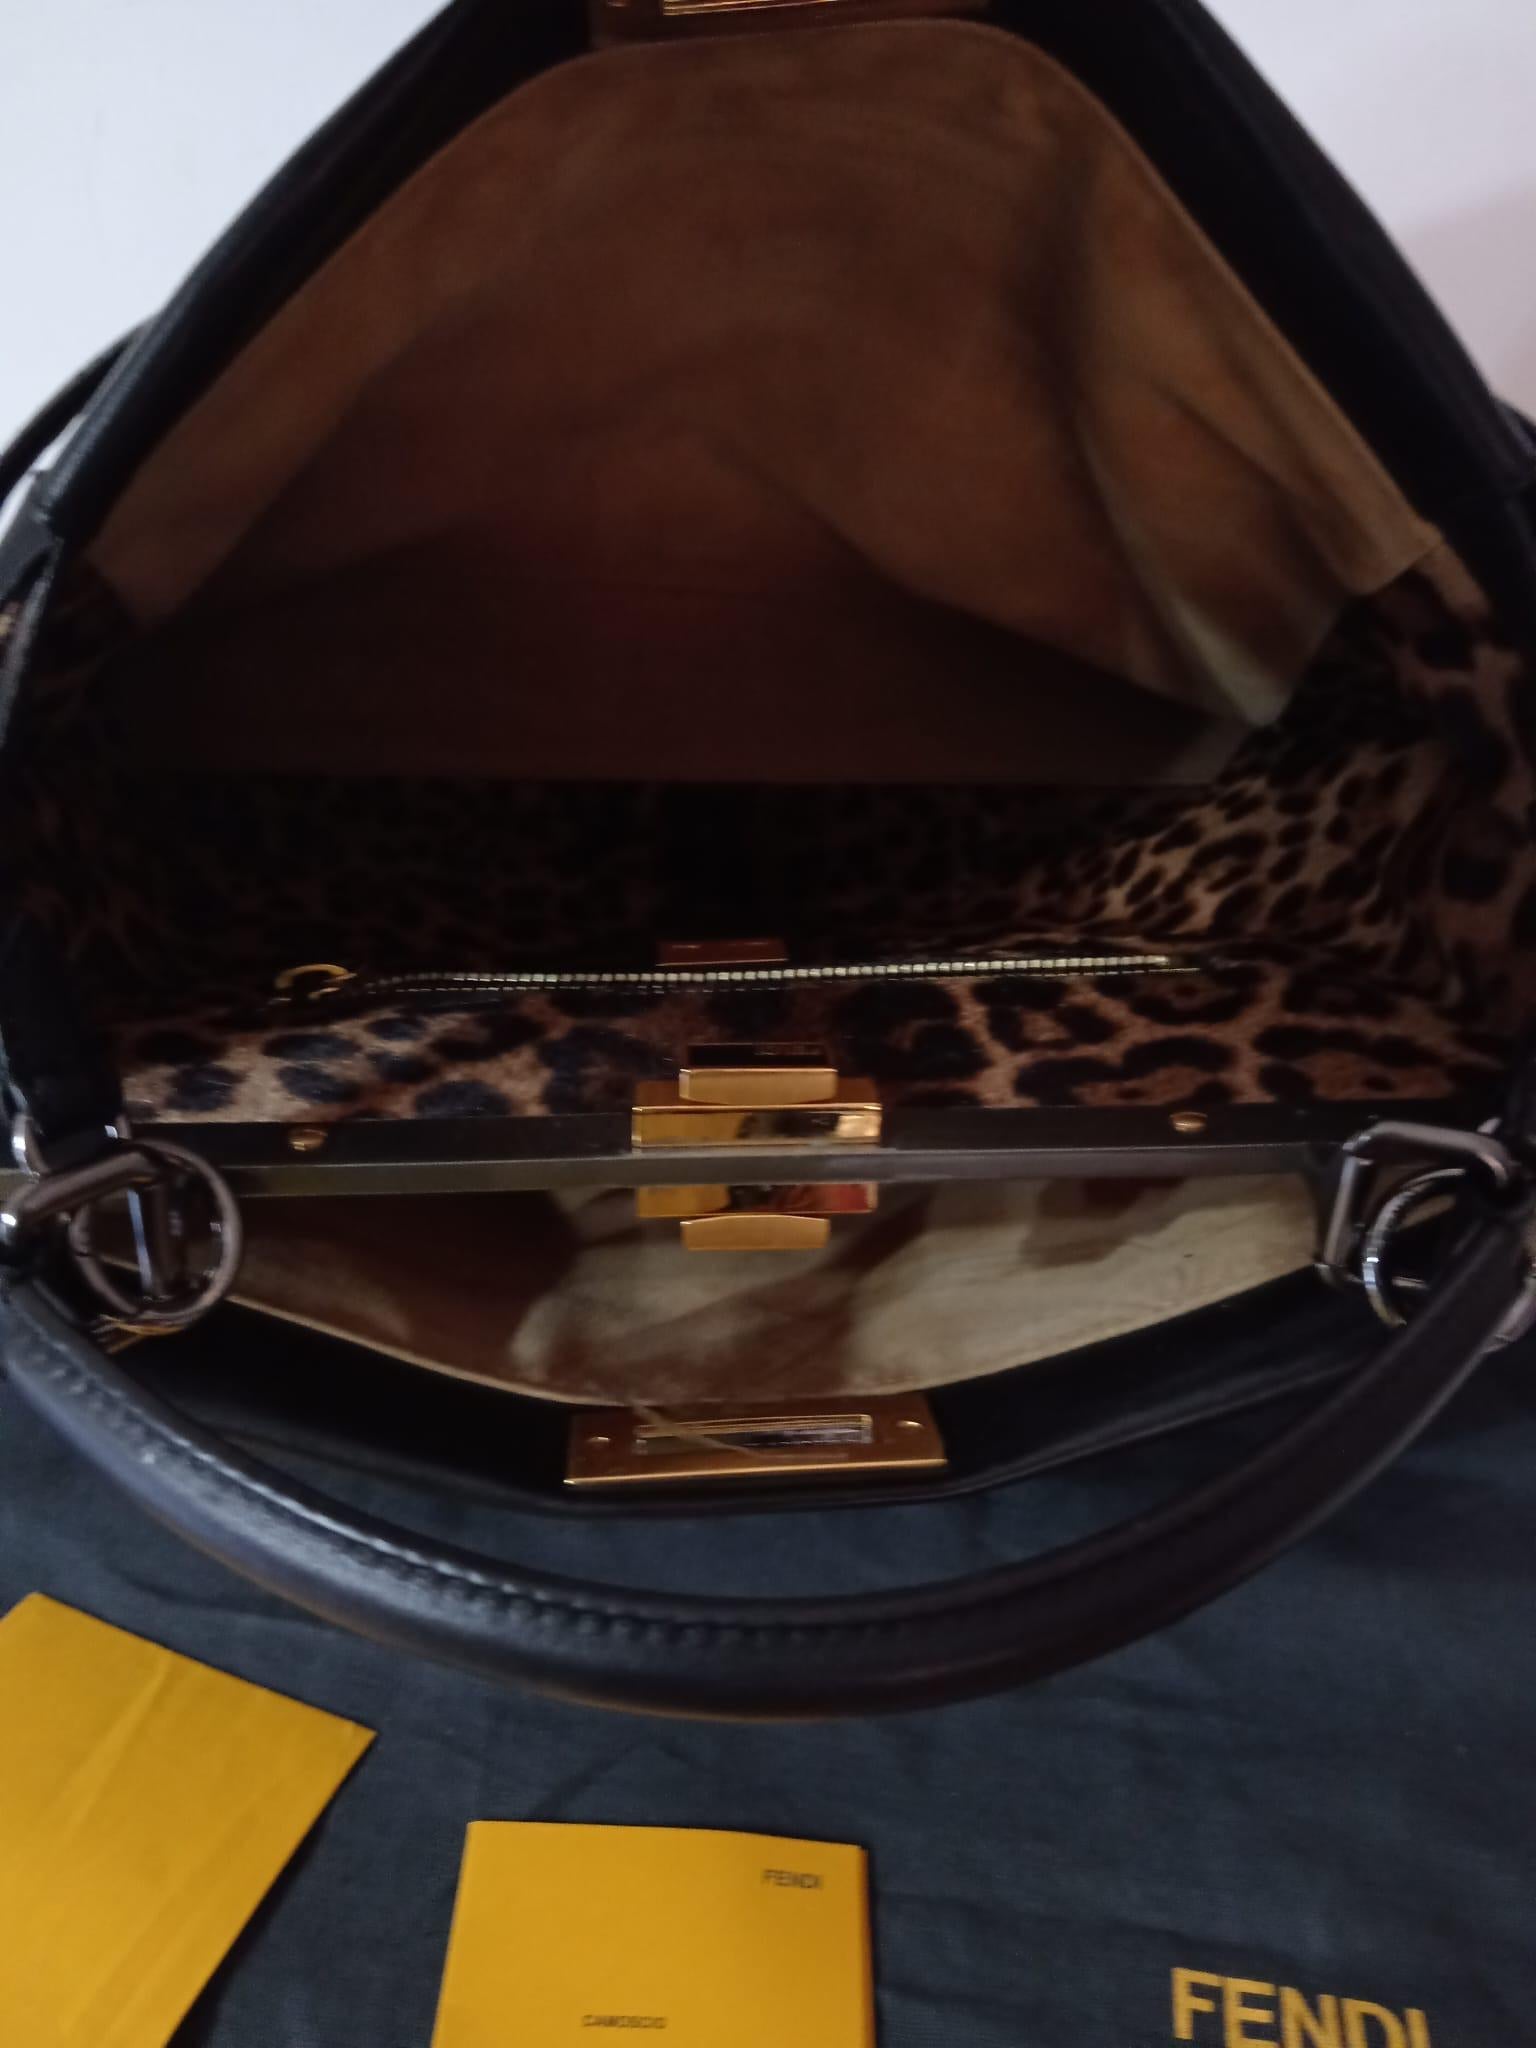 Fendi Peekaboo bag with pony skin interior in excellent condition For Sale 16